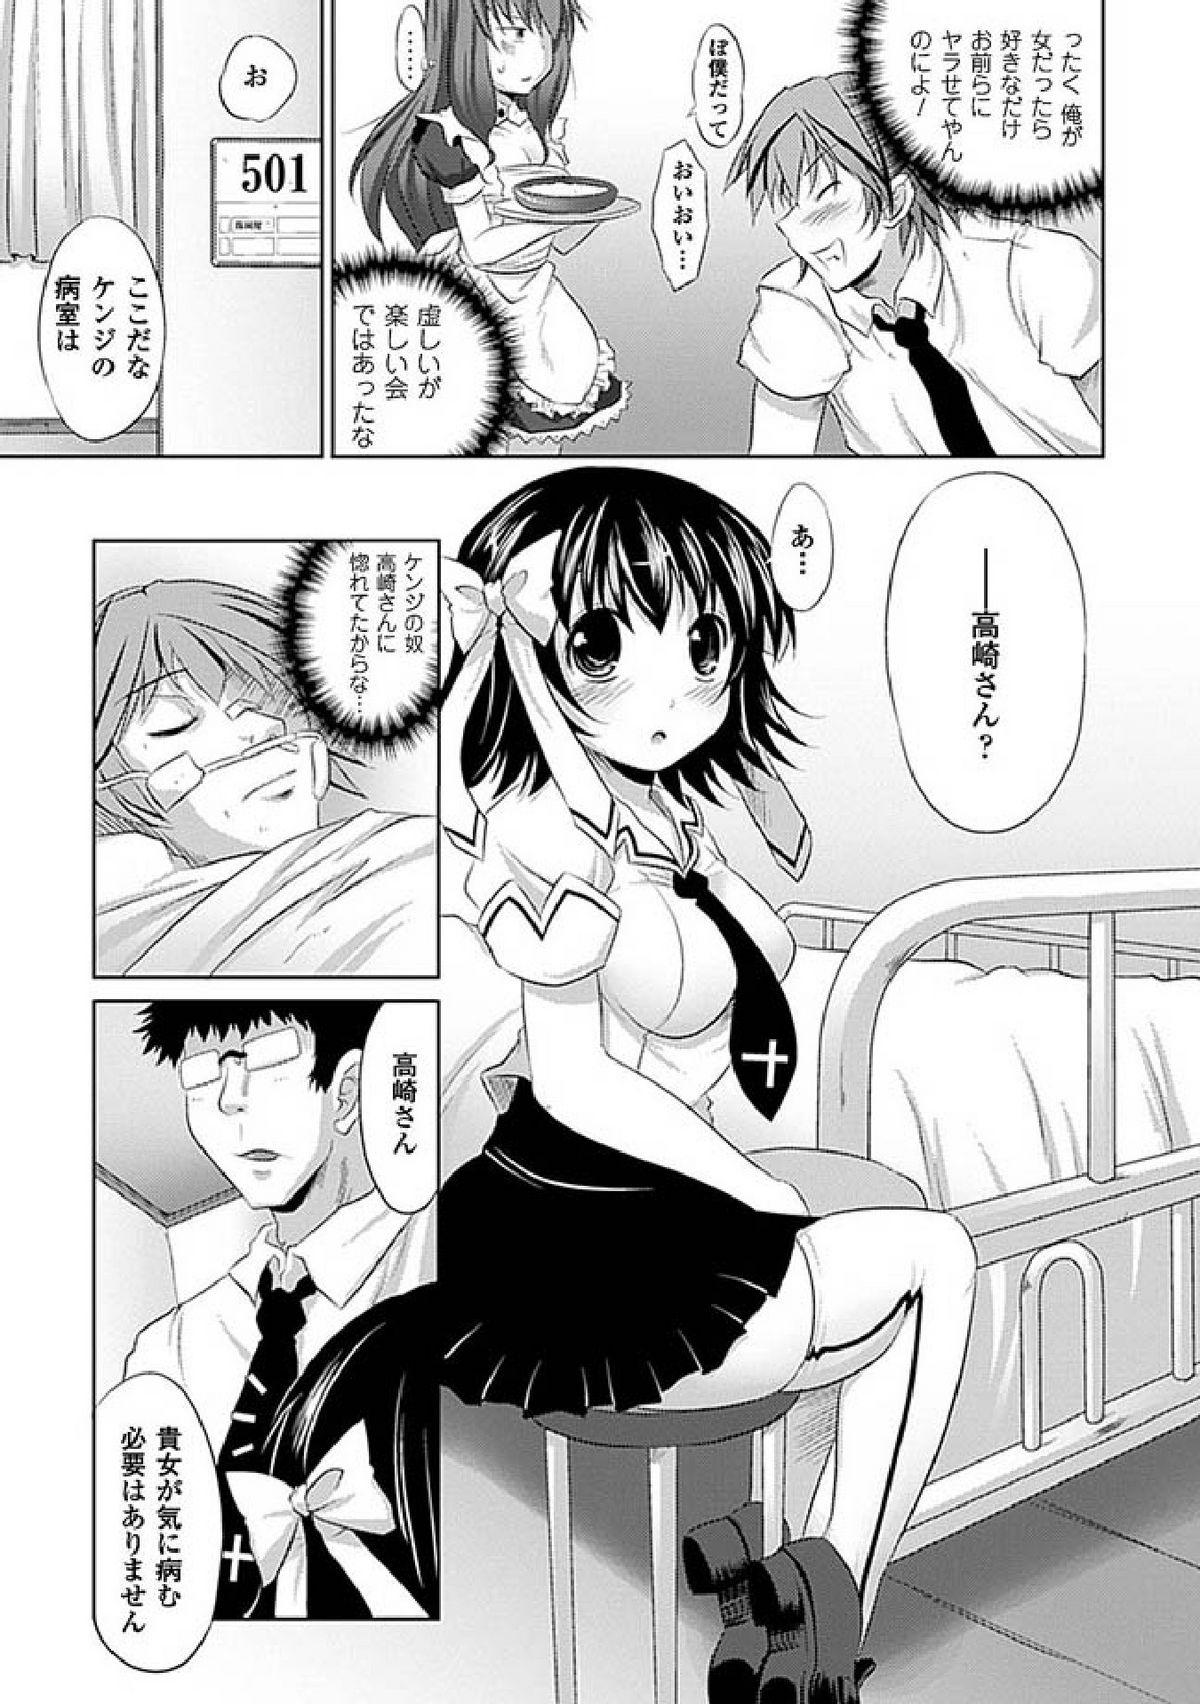 Rimming Seitenkan Anthology Comics Vol.3 Online - Page 7